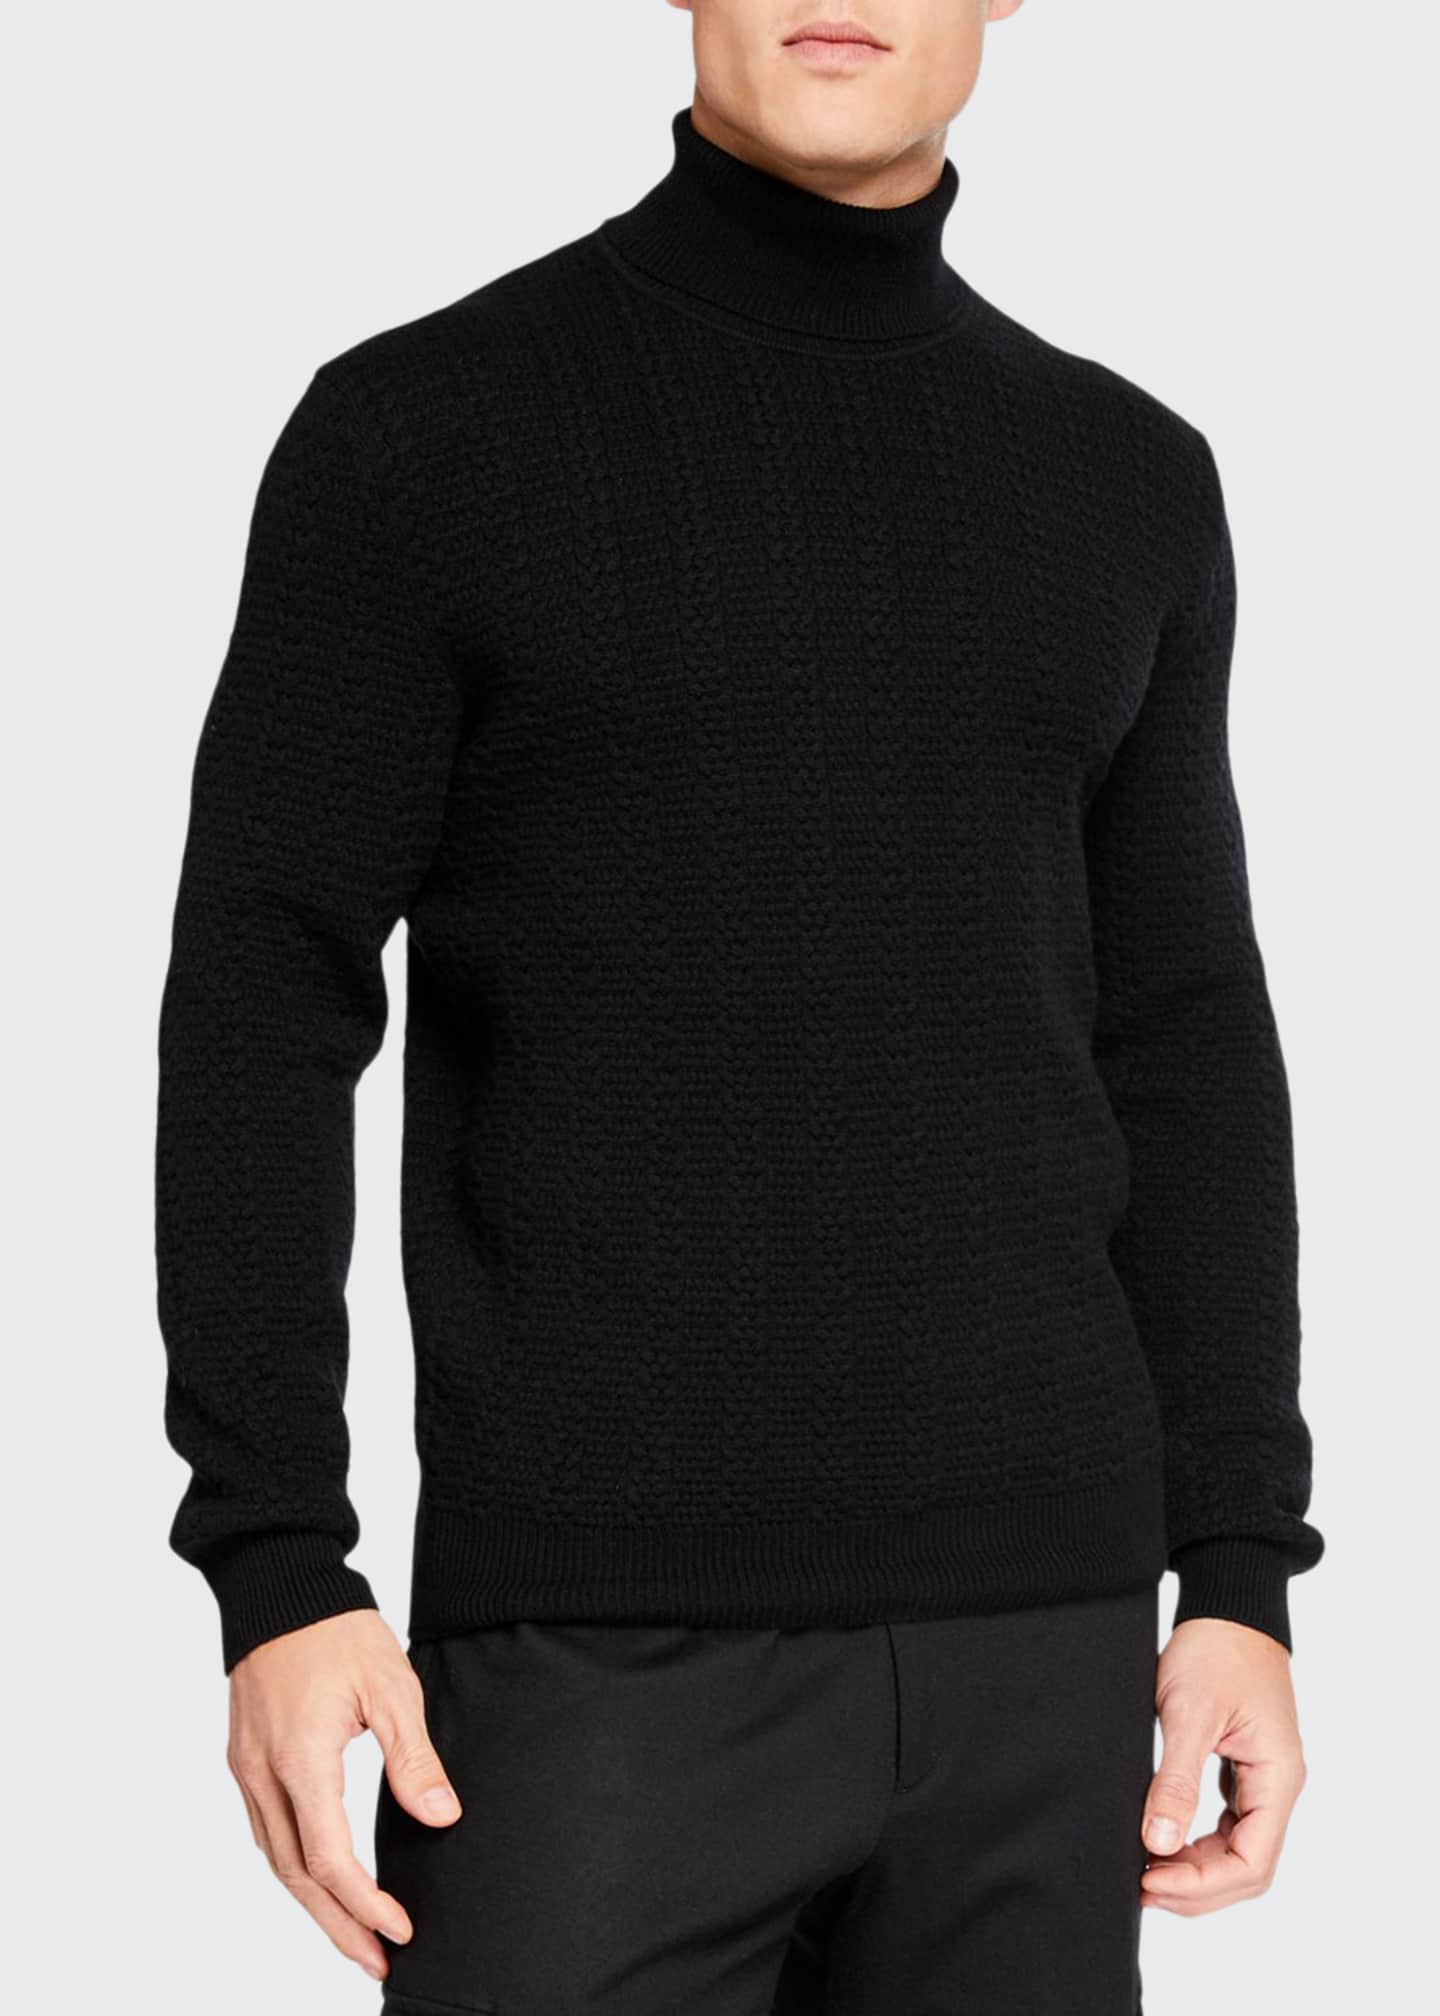 Etro Cable-Knit Turtleneck Sweater, Camel